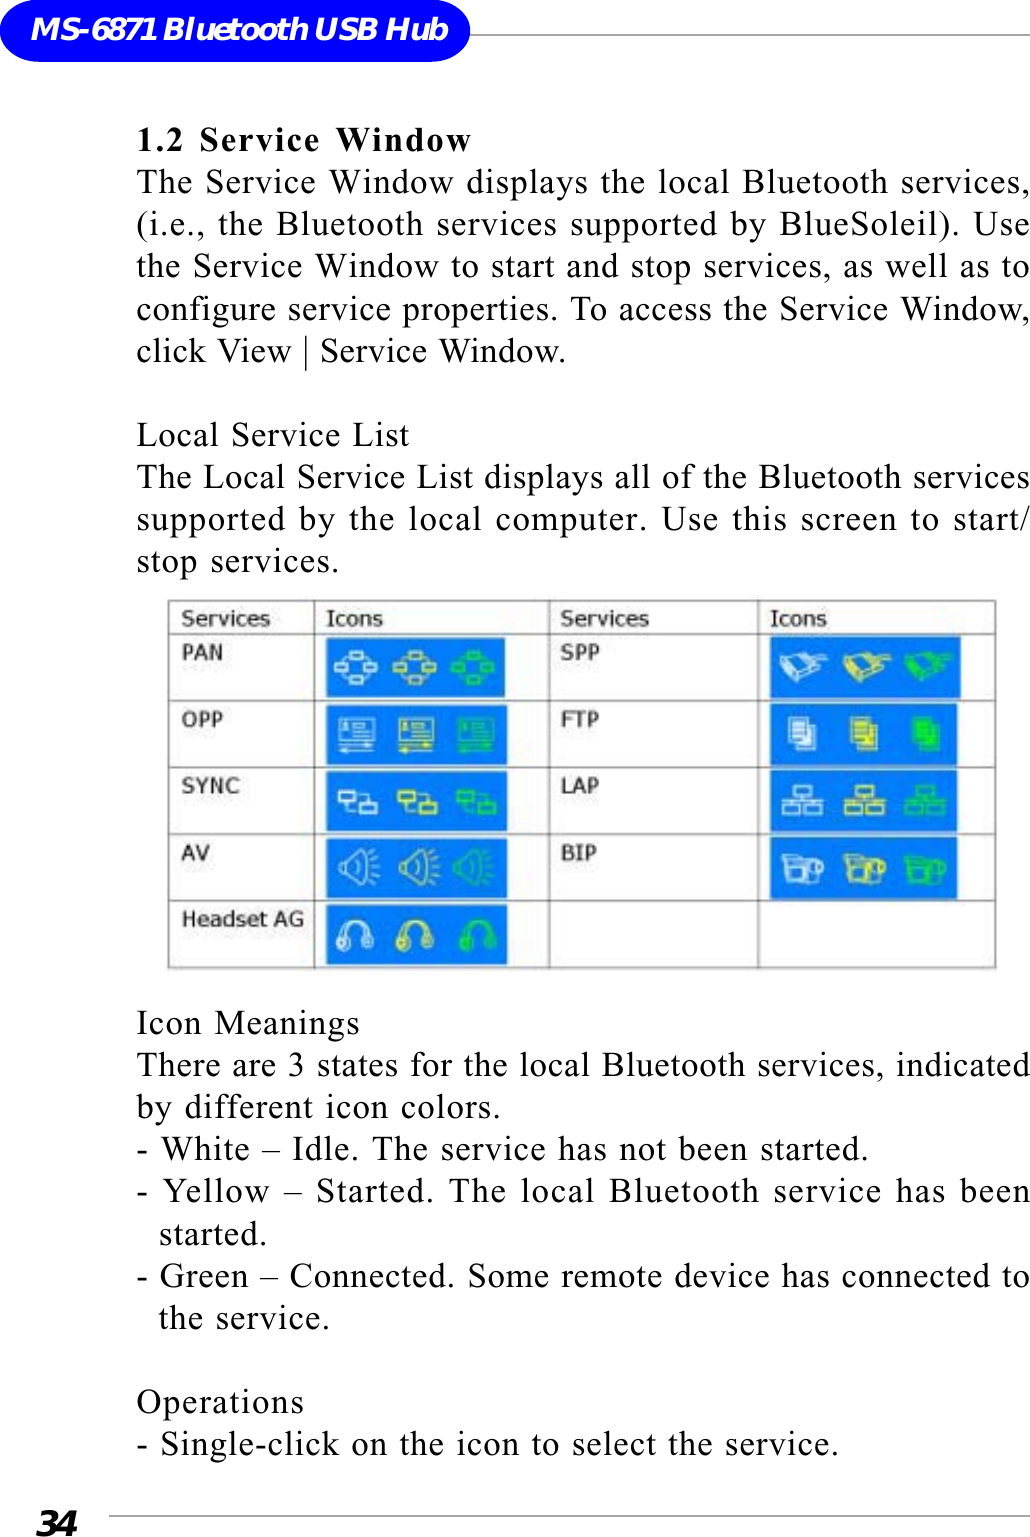 34MS-6871 Bluetooth USB Hub1.2 Service WindowThe Service Window displays the local Bluetooth services,(i.e., the Bluetooth services supported by BlueSoleil). Usethe Service Window to start and stop services, as well as toconfigure service properties. To access the Service Window,click View | Service Window.Local Service ListThe Local Service List displays all of the Bluetooth servicessupported by the local computer. Use this screen to start/stop services.Icon MeaningsThere are 3 states for the local Bluetooth services, indicatedby different icon colors.- White – Idle. The service has not been started.- Yellow – Started. The local Bluetooth service has been  started.- Green – Connected. Some remote device has connected to  the service.Operations- Single-click on the icon to select the service.